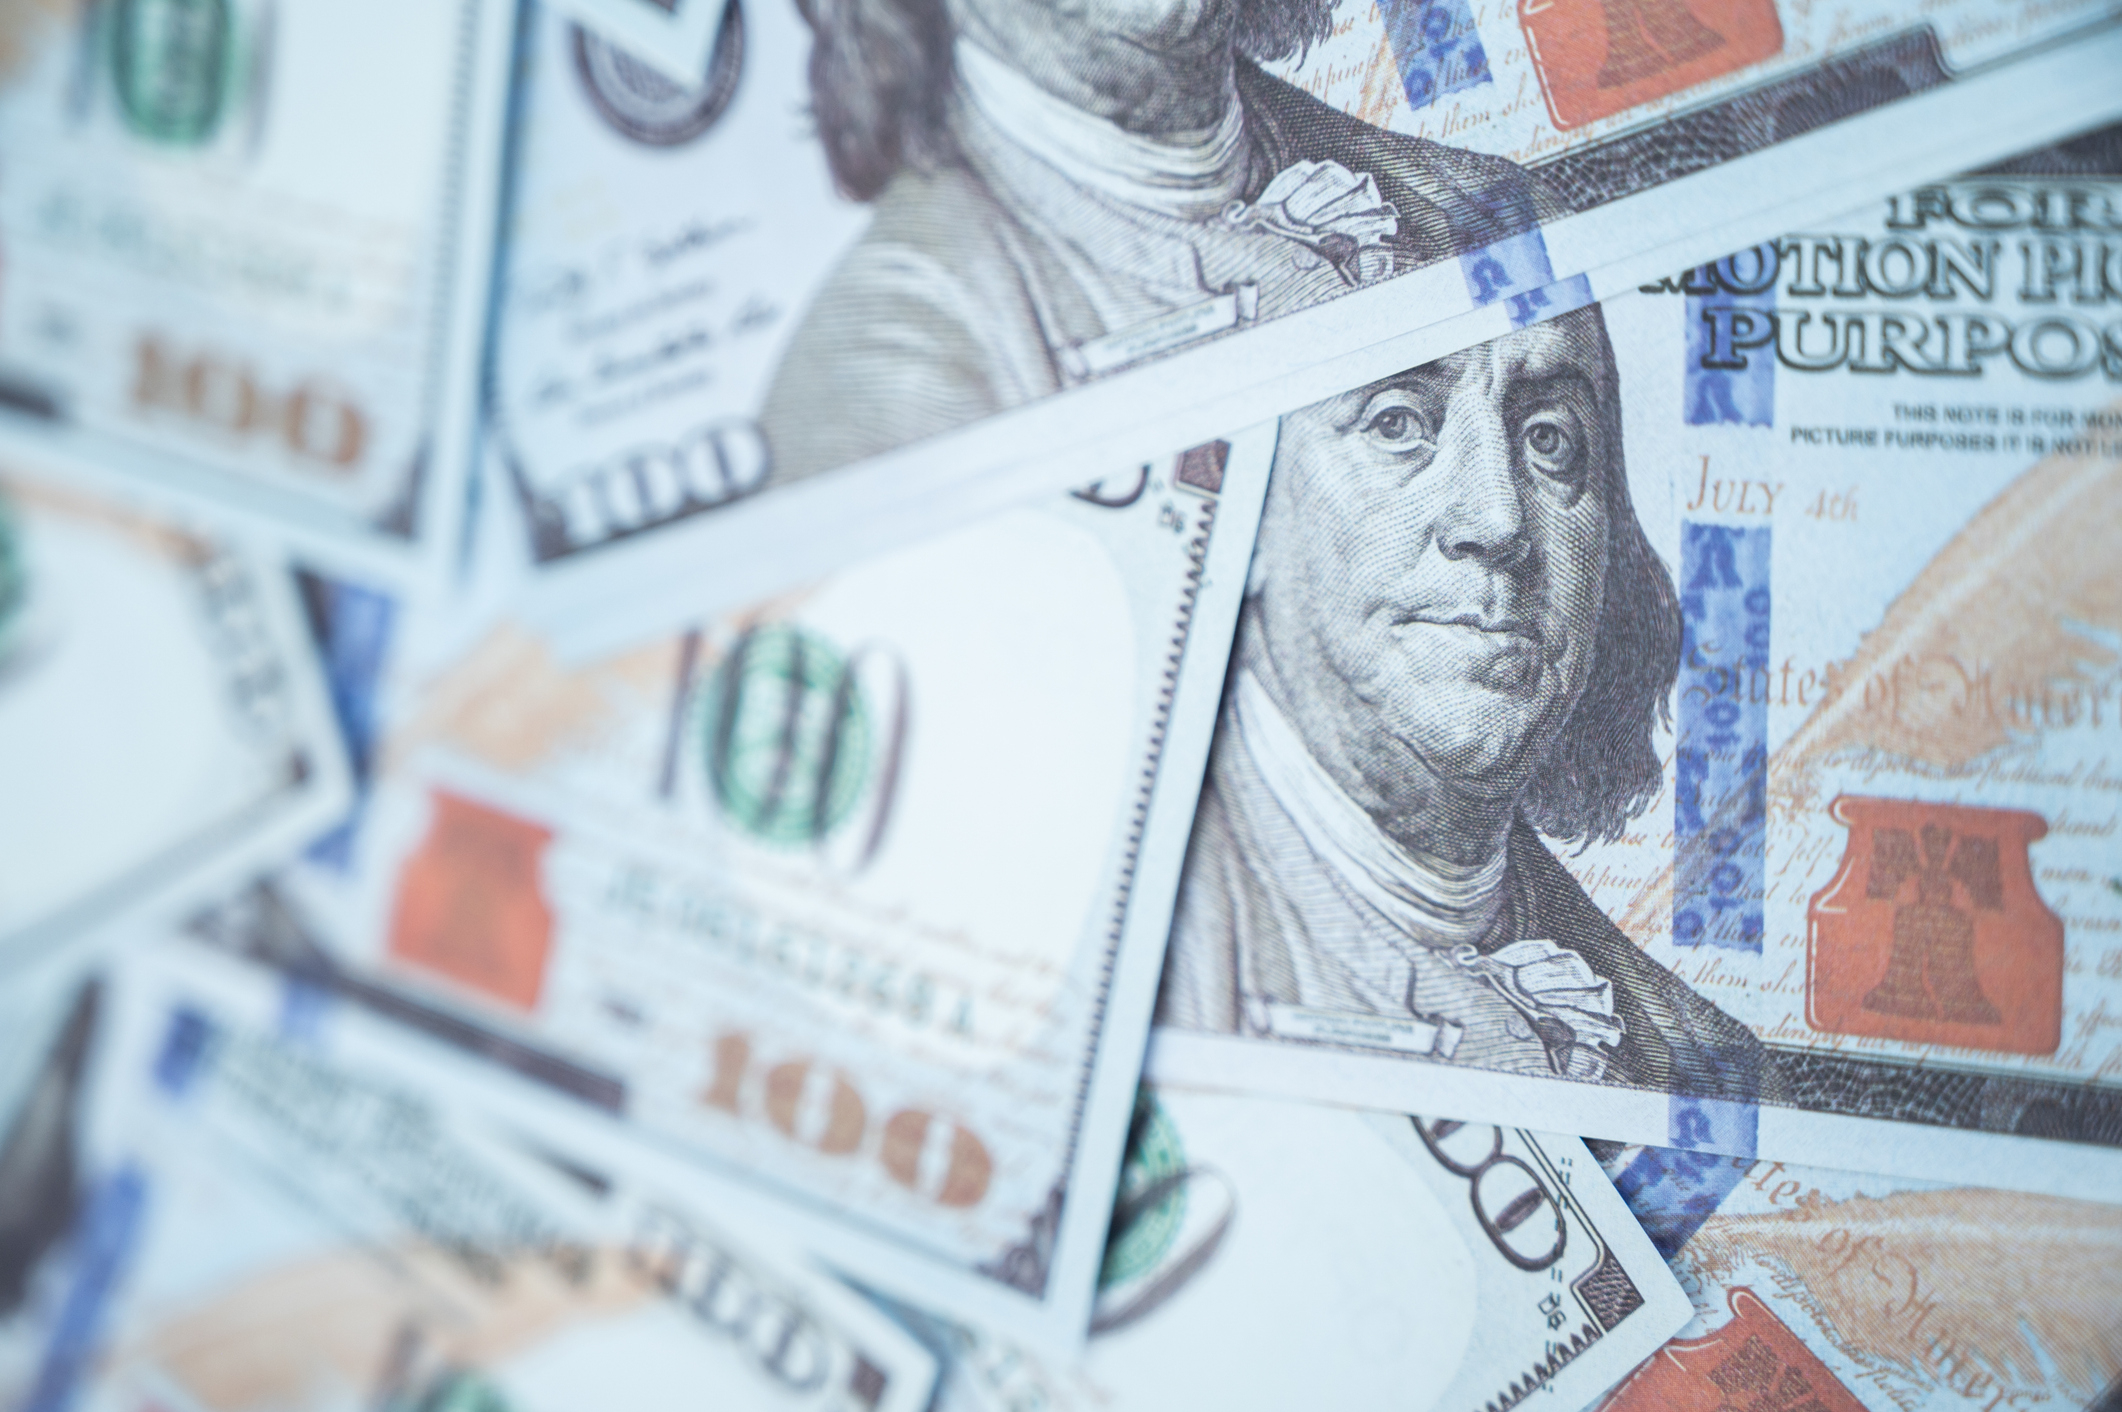 Multiple US $100 bills spread out with focus on the portrait of Benjamin Franklin